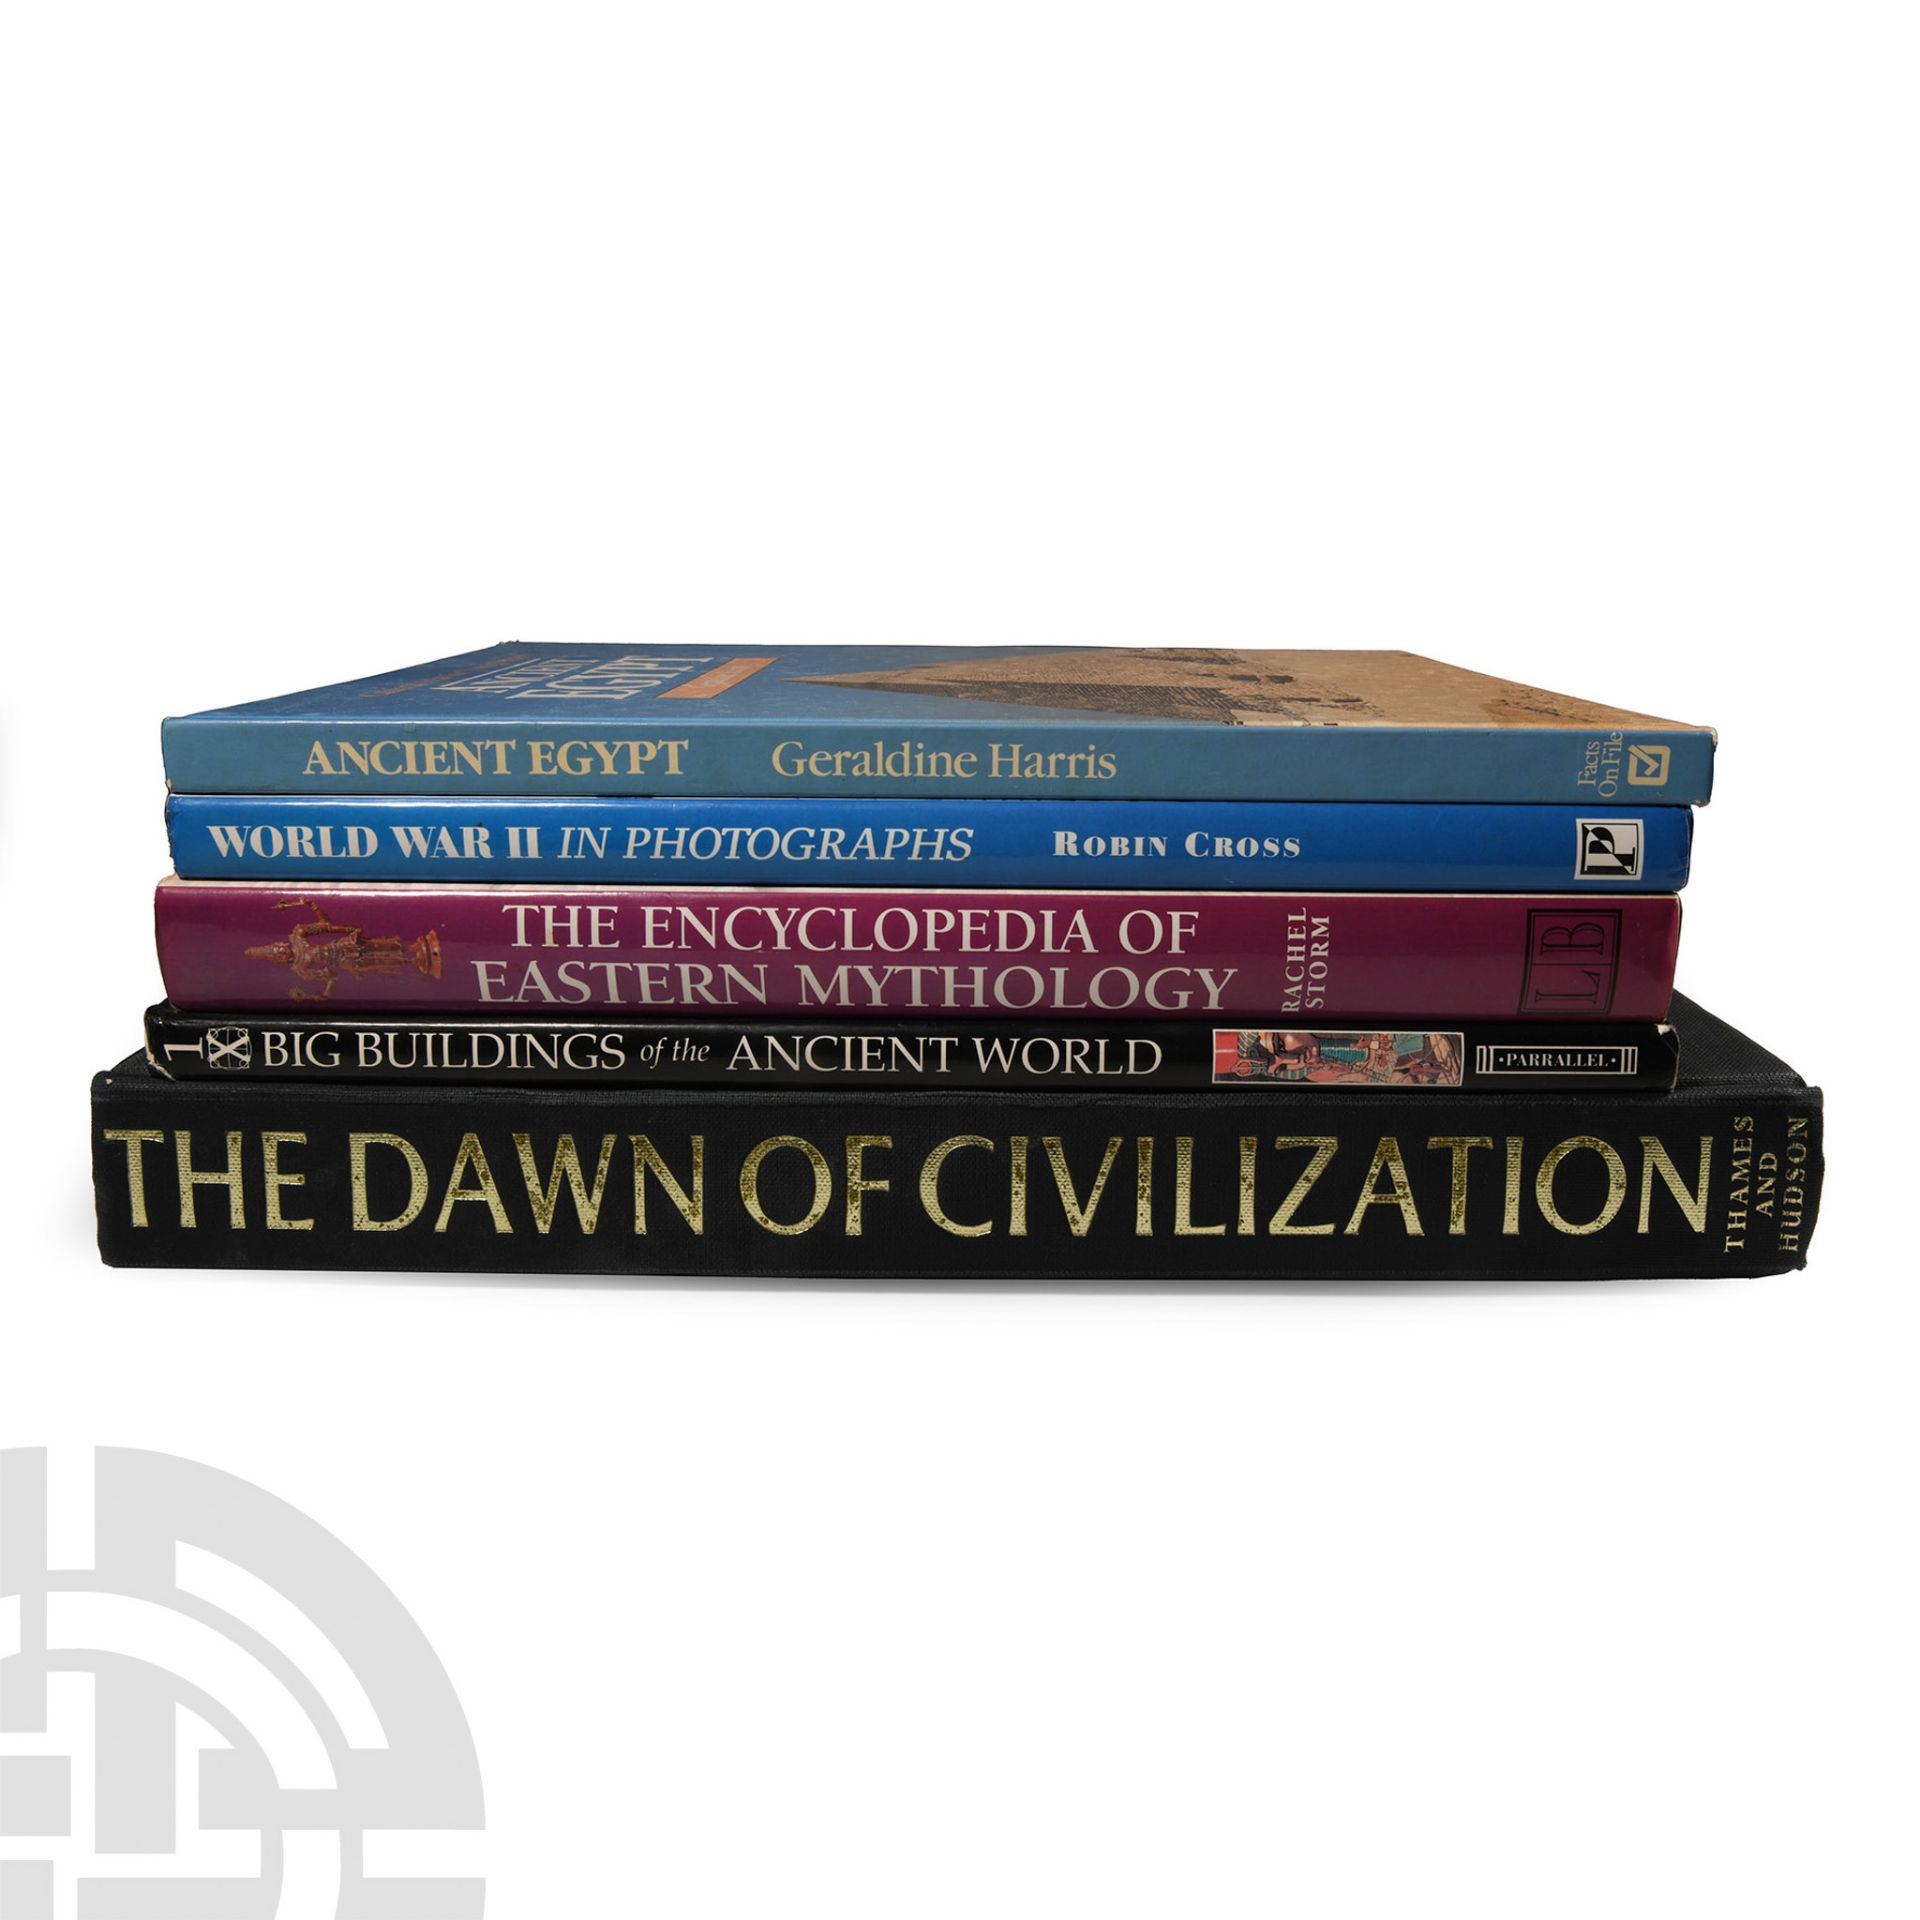 Archaeological Books - Mixed Civilization Book Group